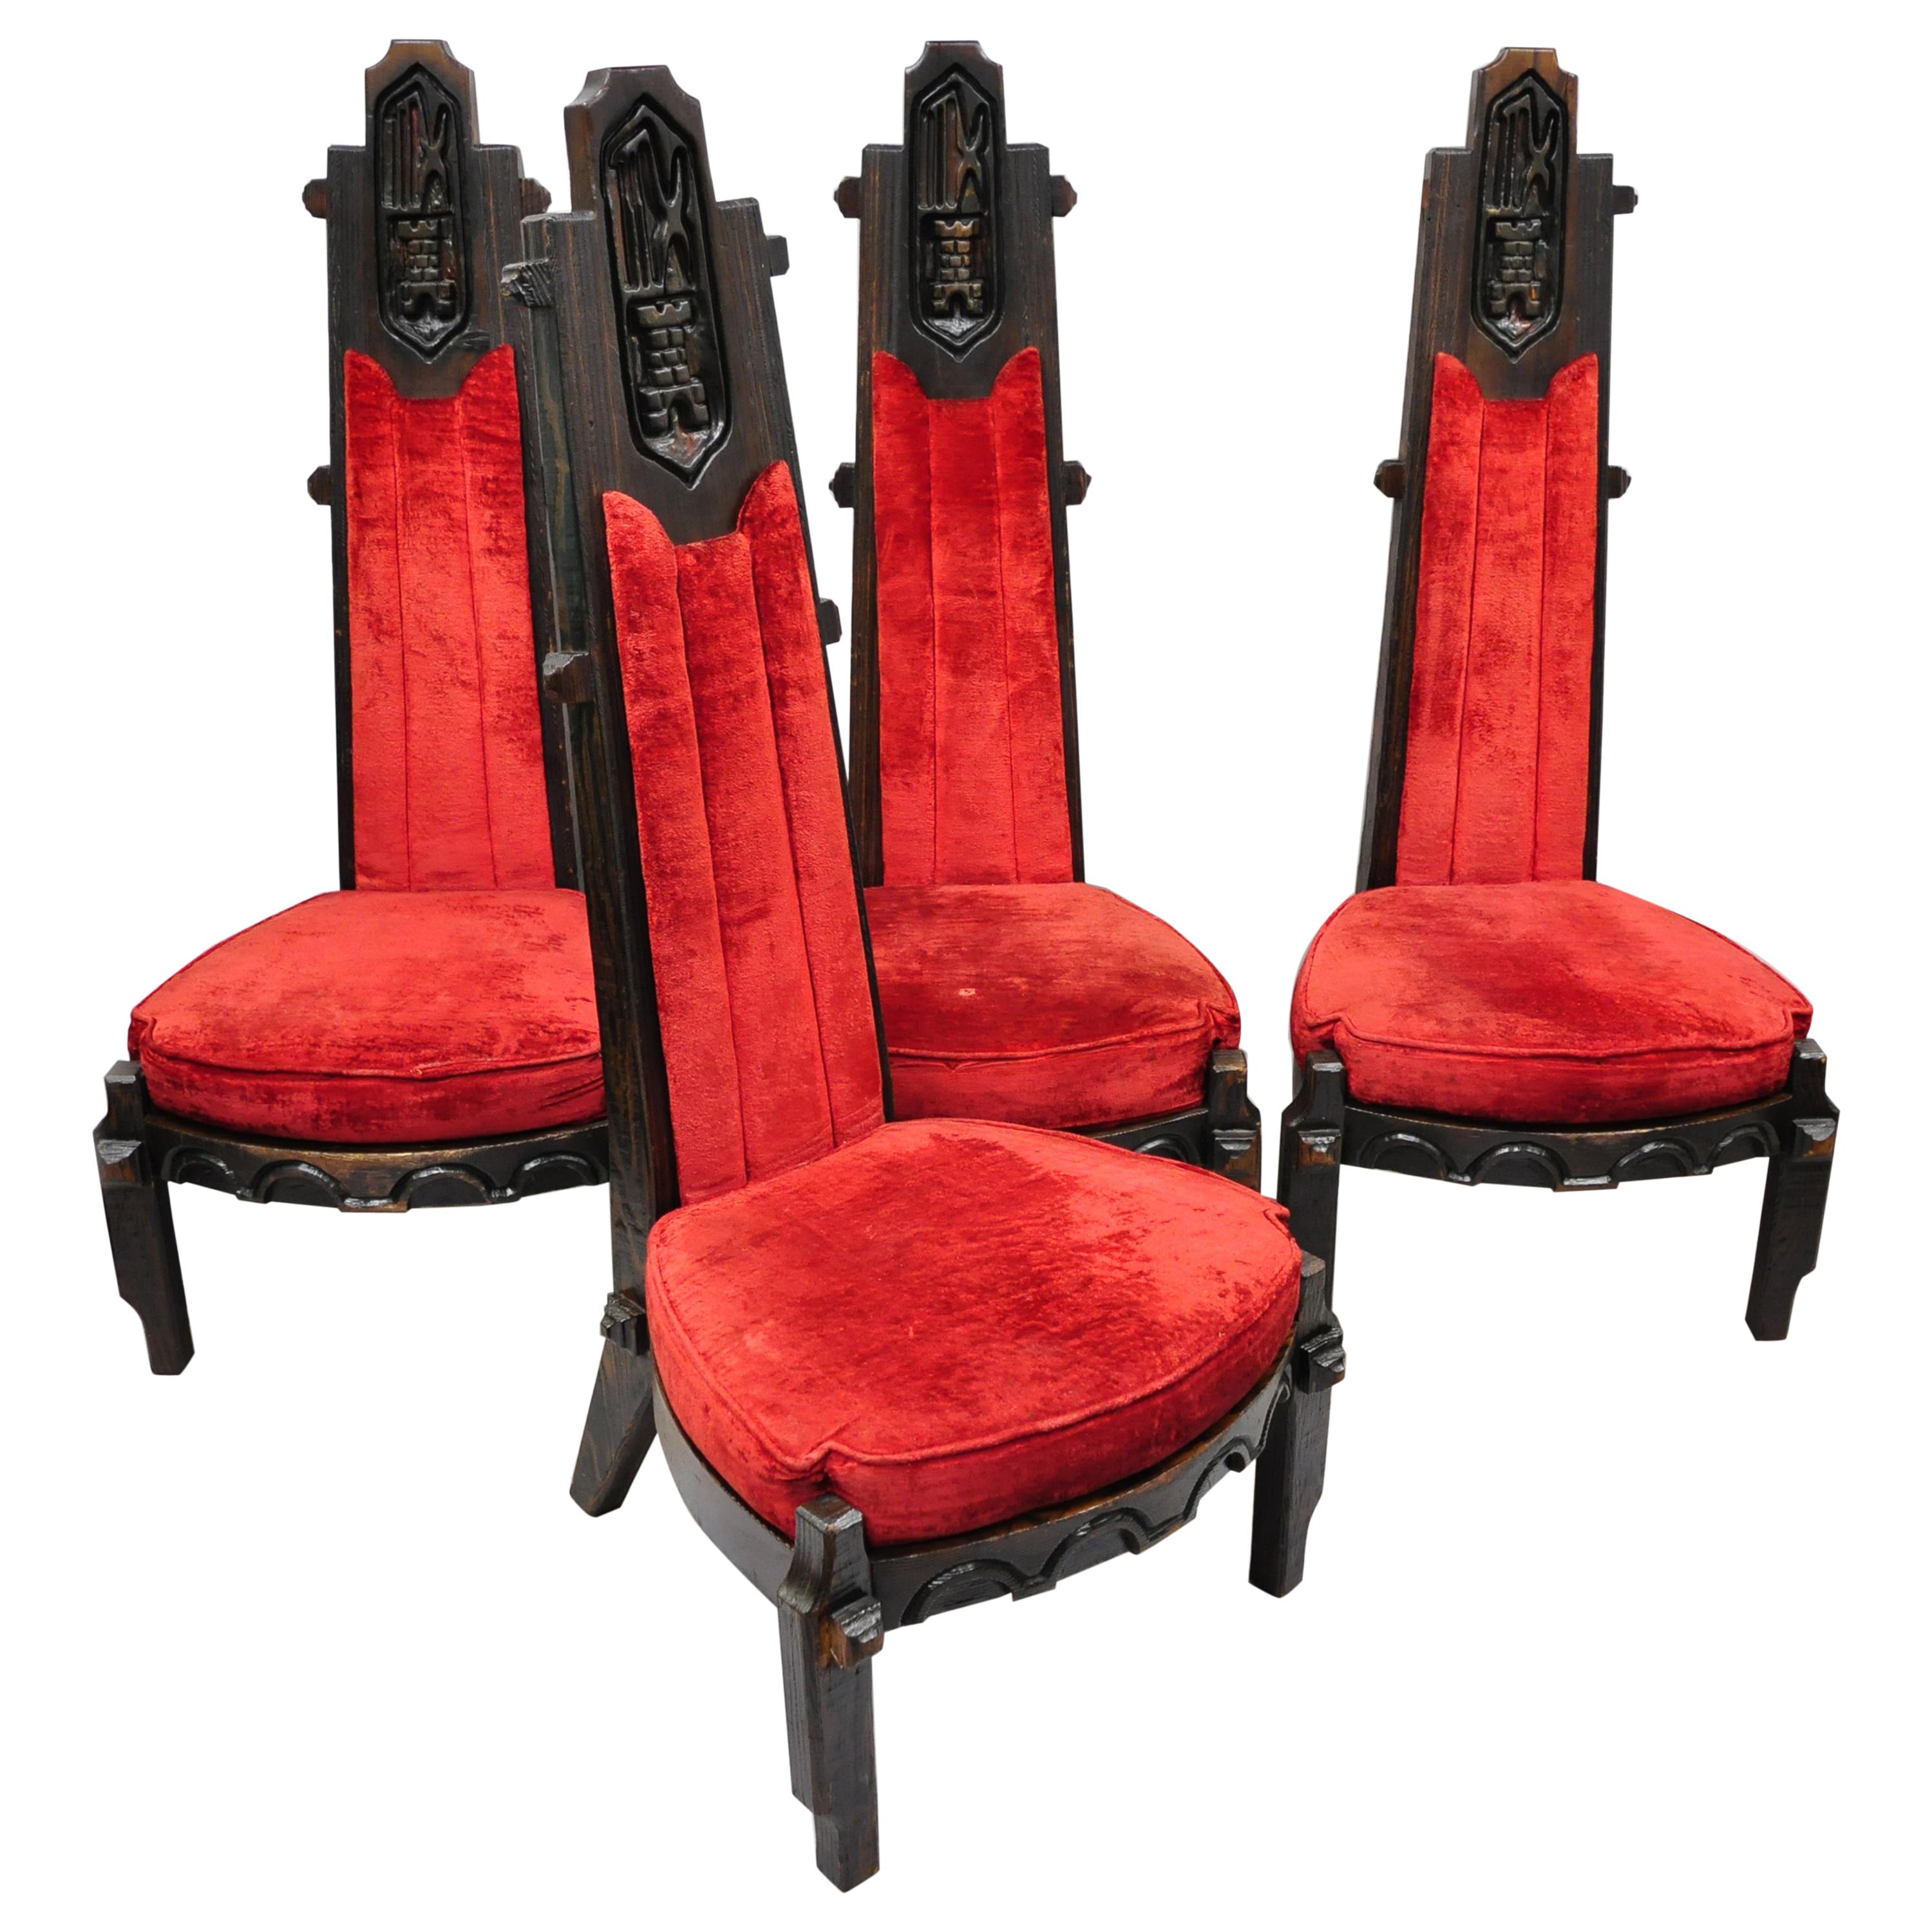 Maderas De Santa Barbara Gothic Revival Jungle Room Dining Chairs, Set of 4 For Sale